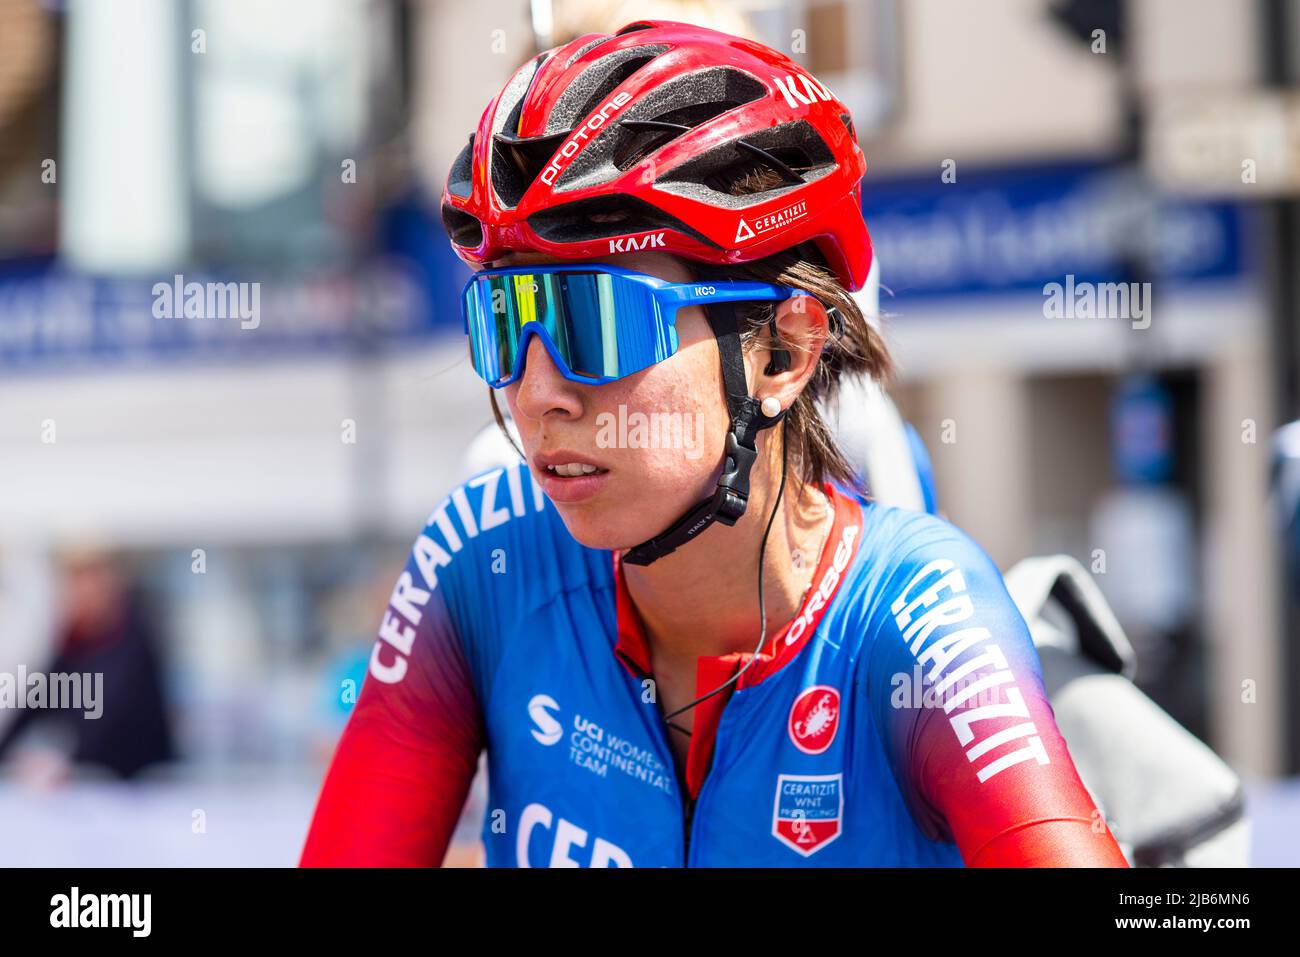 Sandra Alonso of Ceratizit WNT Pro Cycling after finishing at the RideLondon Classique cycle race stage 1, at Maldon, Essex, UK Stock Photo